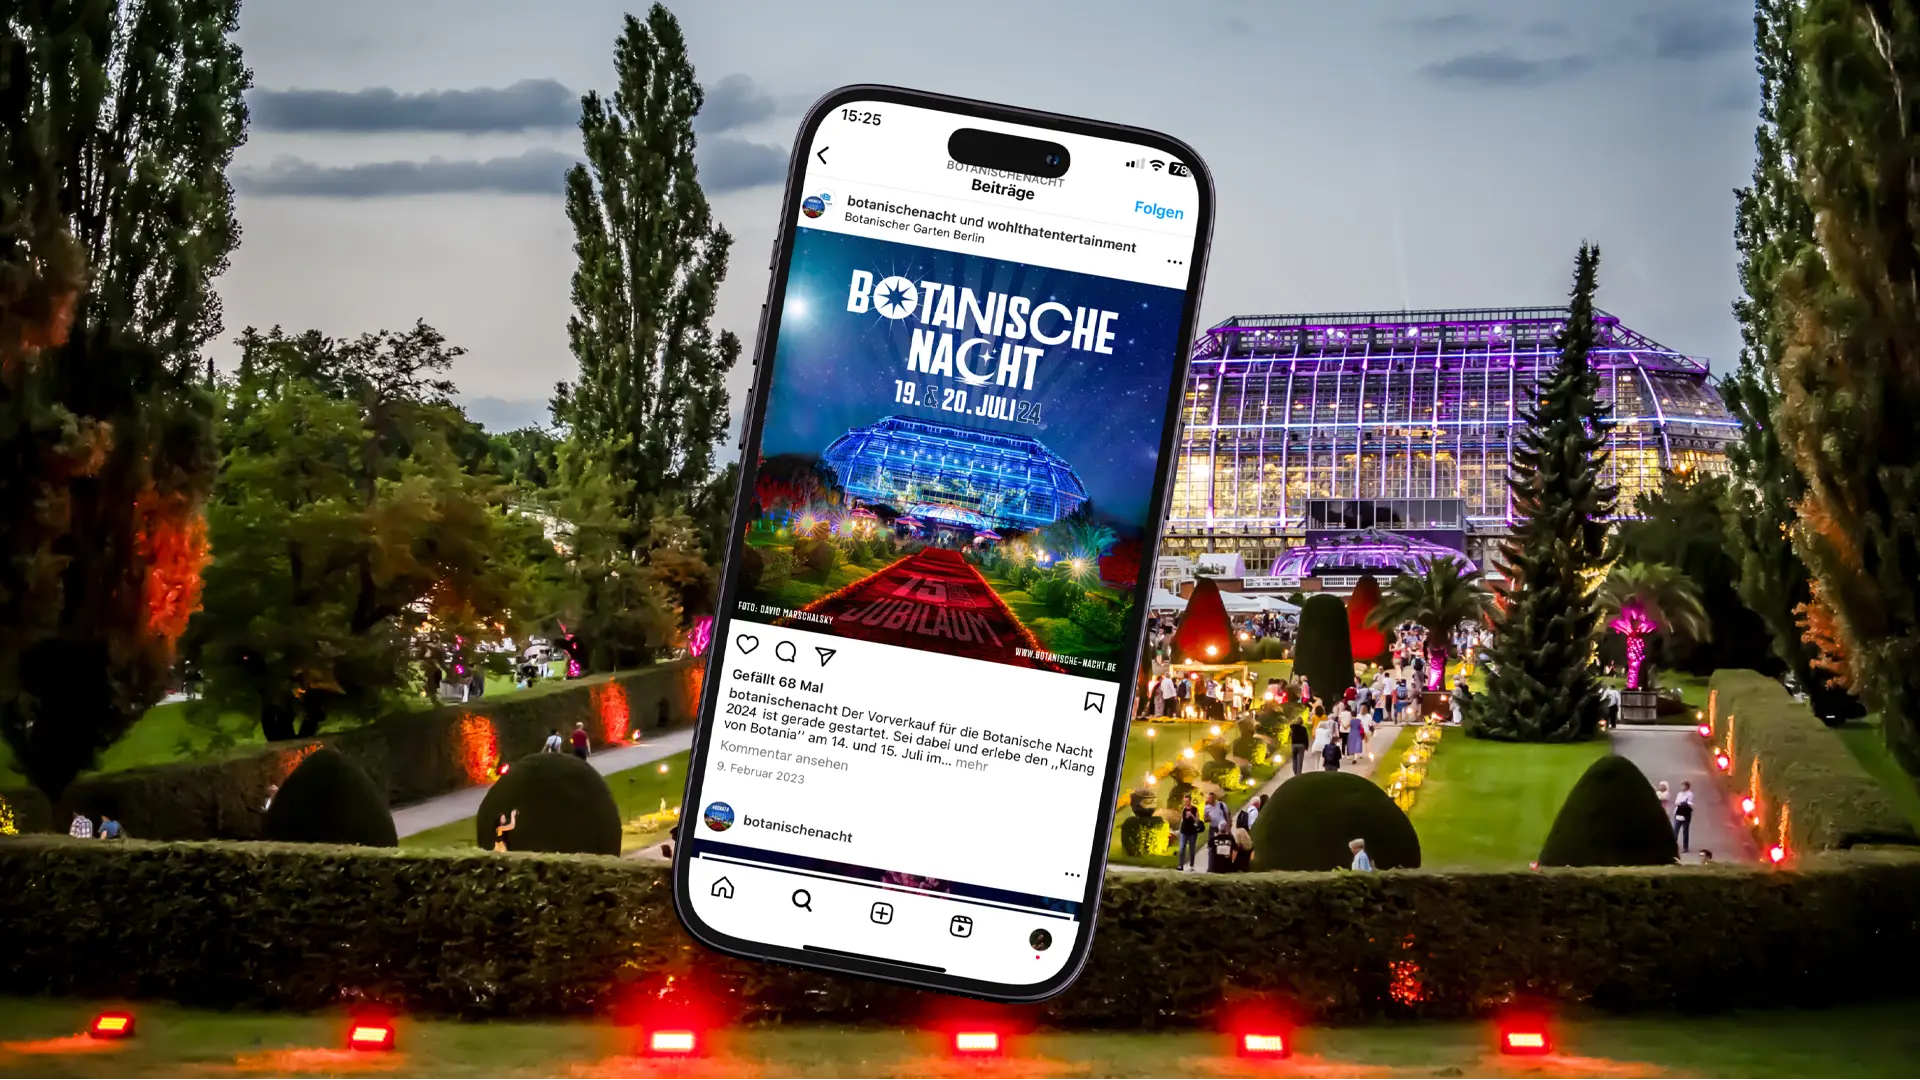 A picture shows the motif and an Instagram post of the Botanical Night in the Botanical Garden in Berlin.